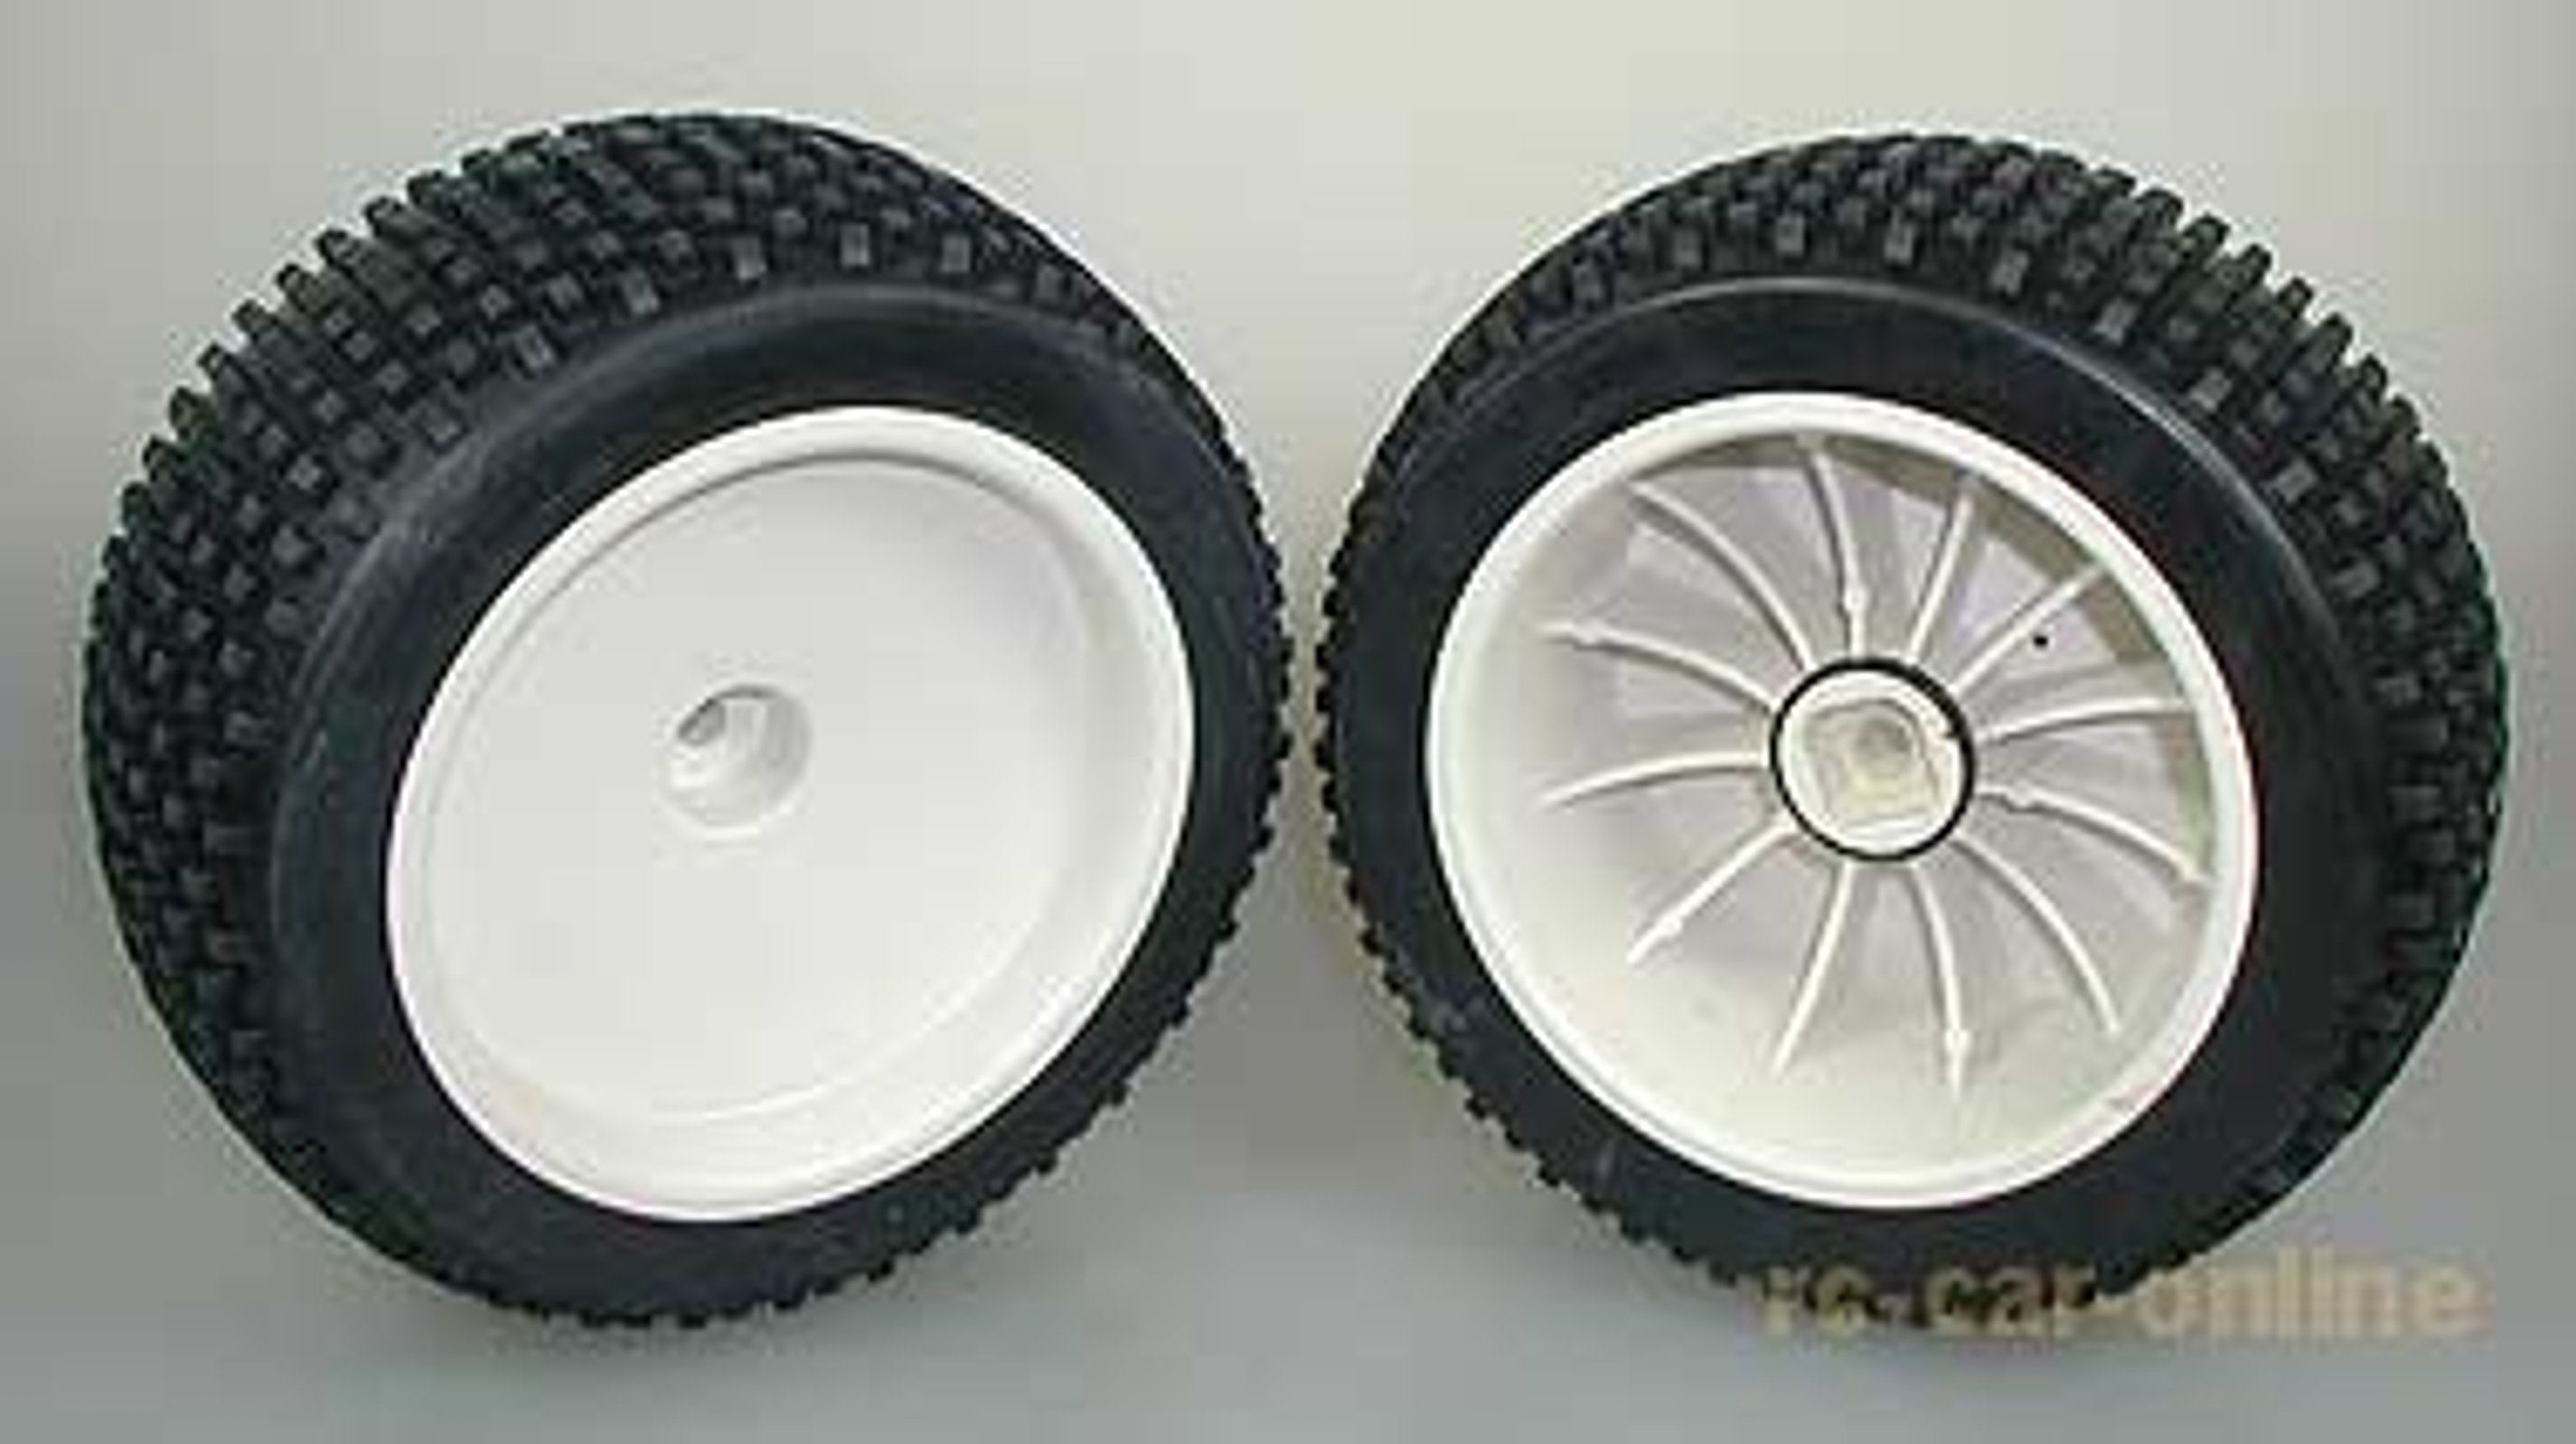 y1151 Multipin offroad tire / rim / insert, mounted + glued, 2 pcs.